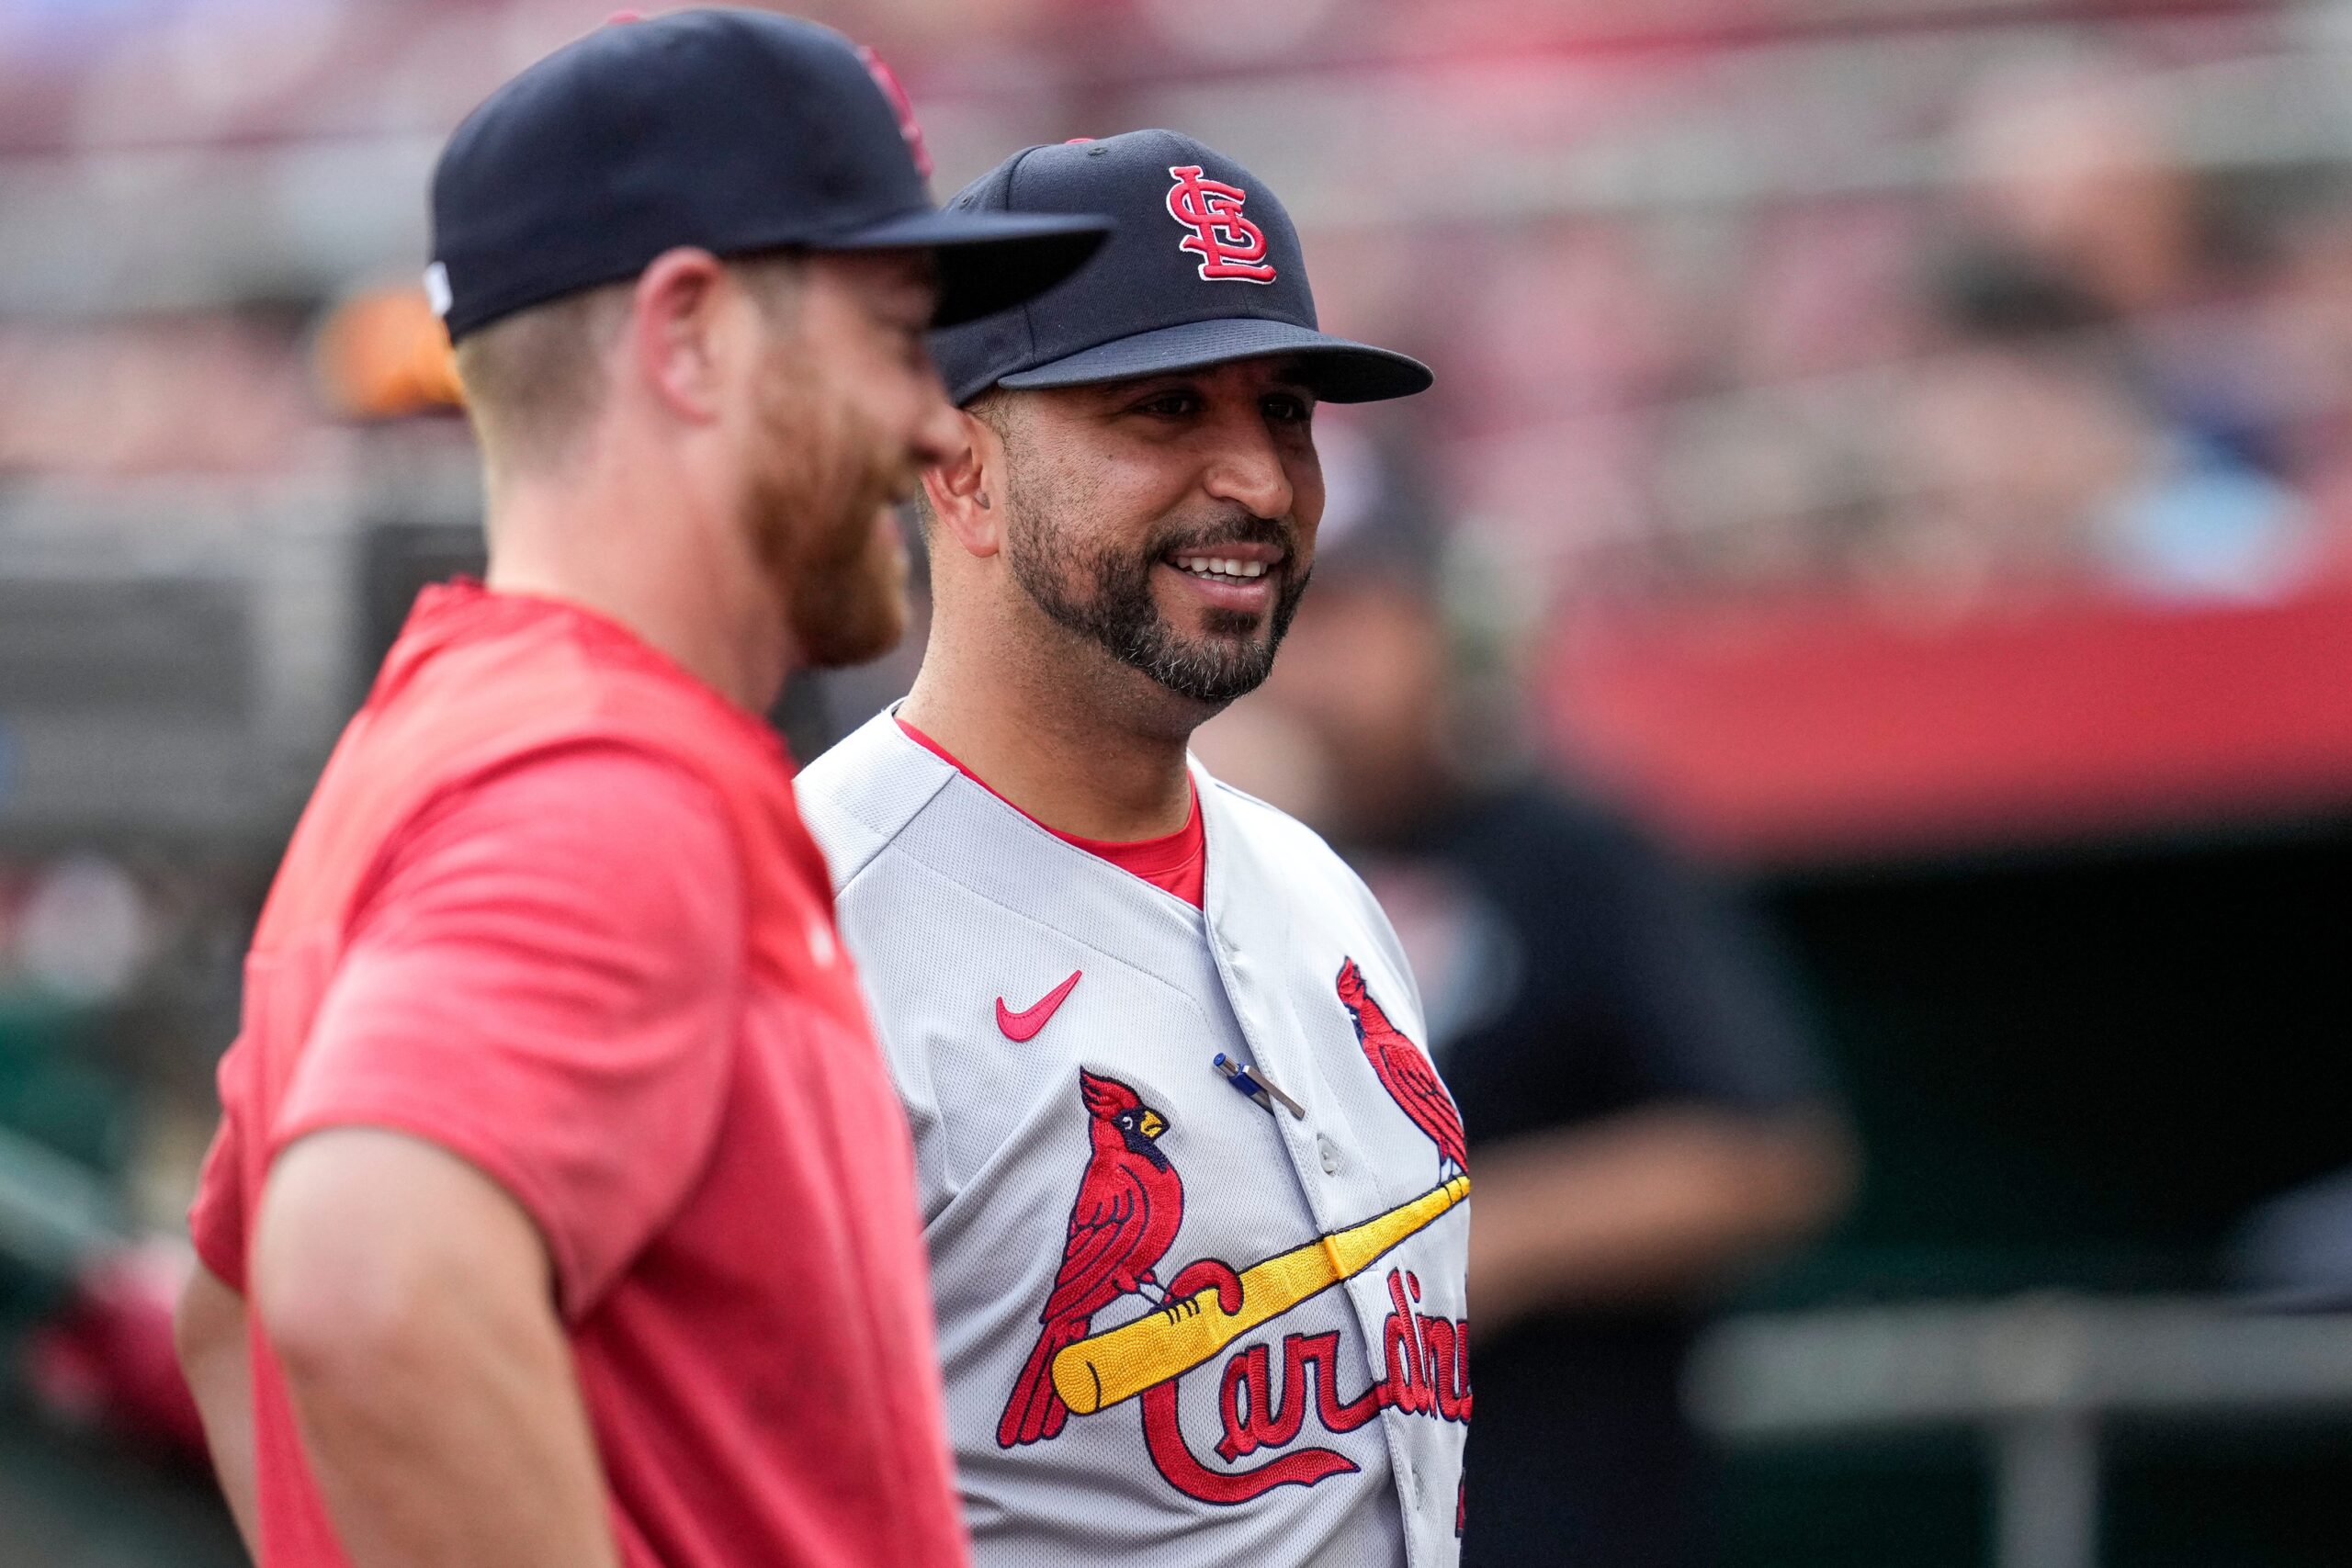 Redbird rook(ies): Chess takes hold in St. Louis Cardinals